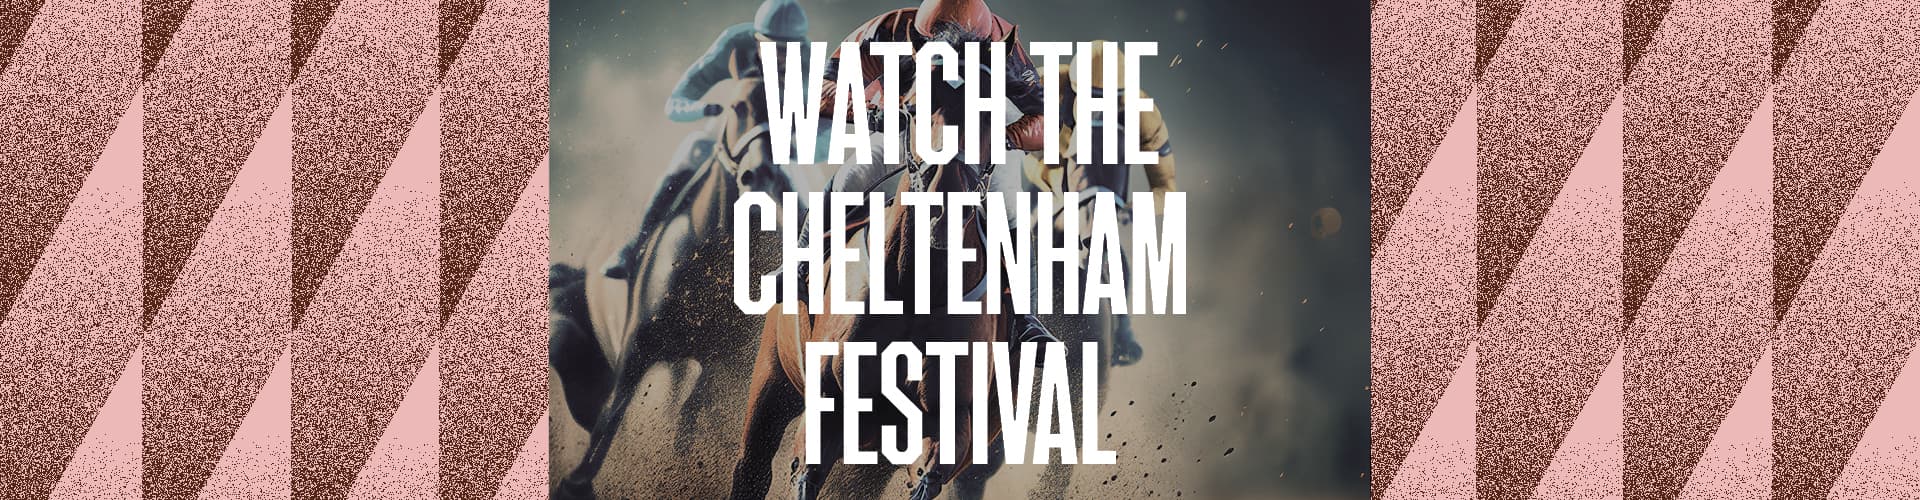 Watch Cheltenham Festival at Clubhouse 5, Leicester Square